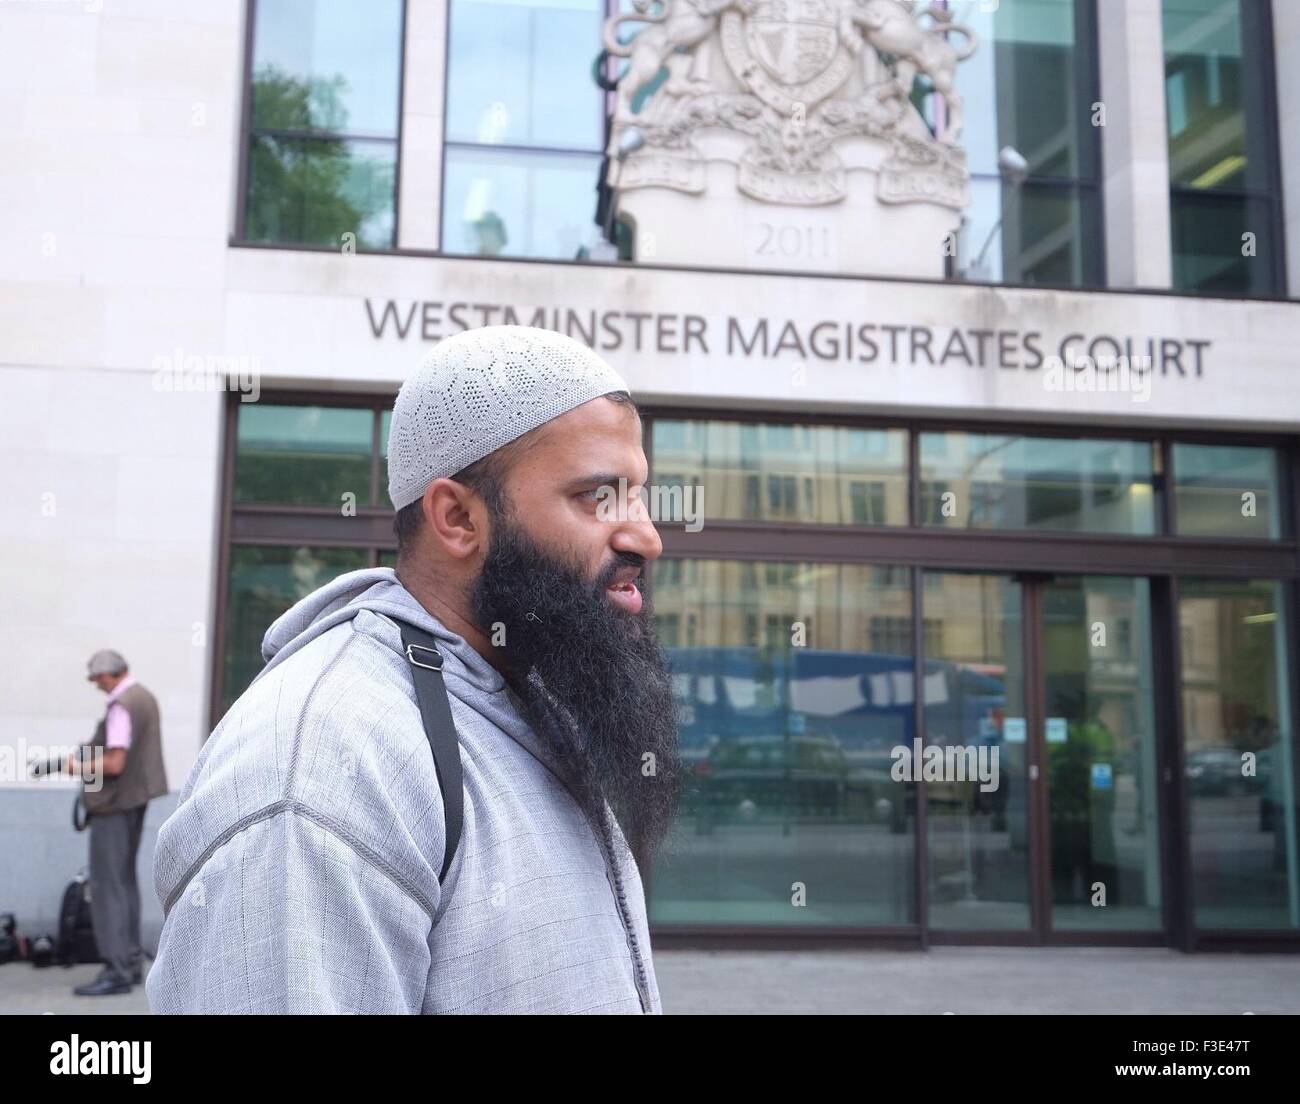 Westminster Magistrates' Court - Arrivals  Radical UK preacher Anjem Choudary is one of two men who has been charged with inviting support for Islamic State militants  Featuring: Abu Walaa Where: London, United Kingdom When: 05 Aug 2015 Stock Photo